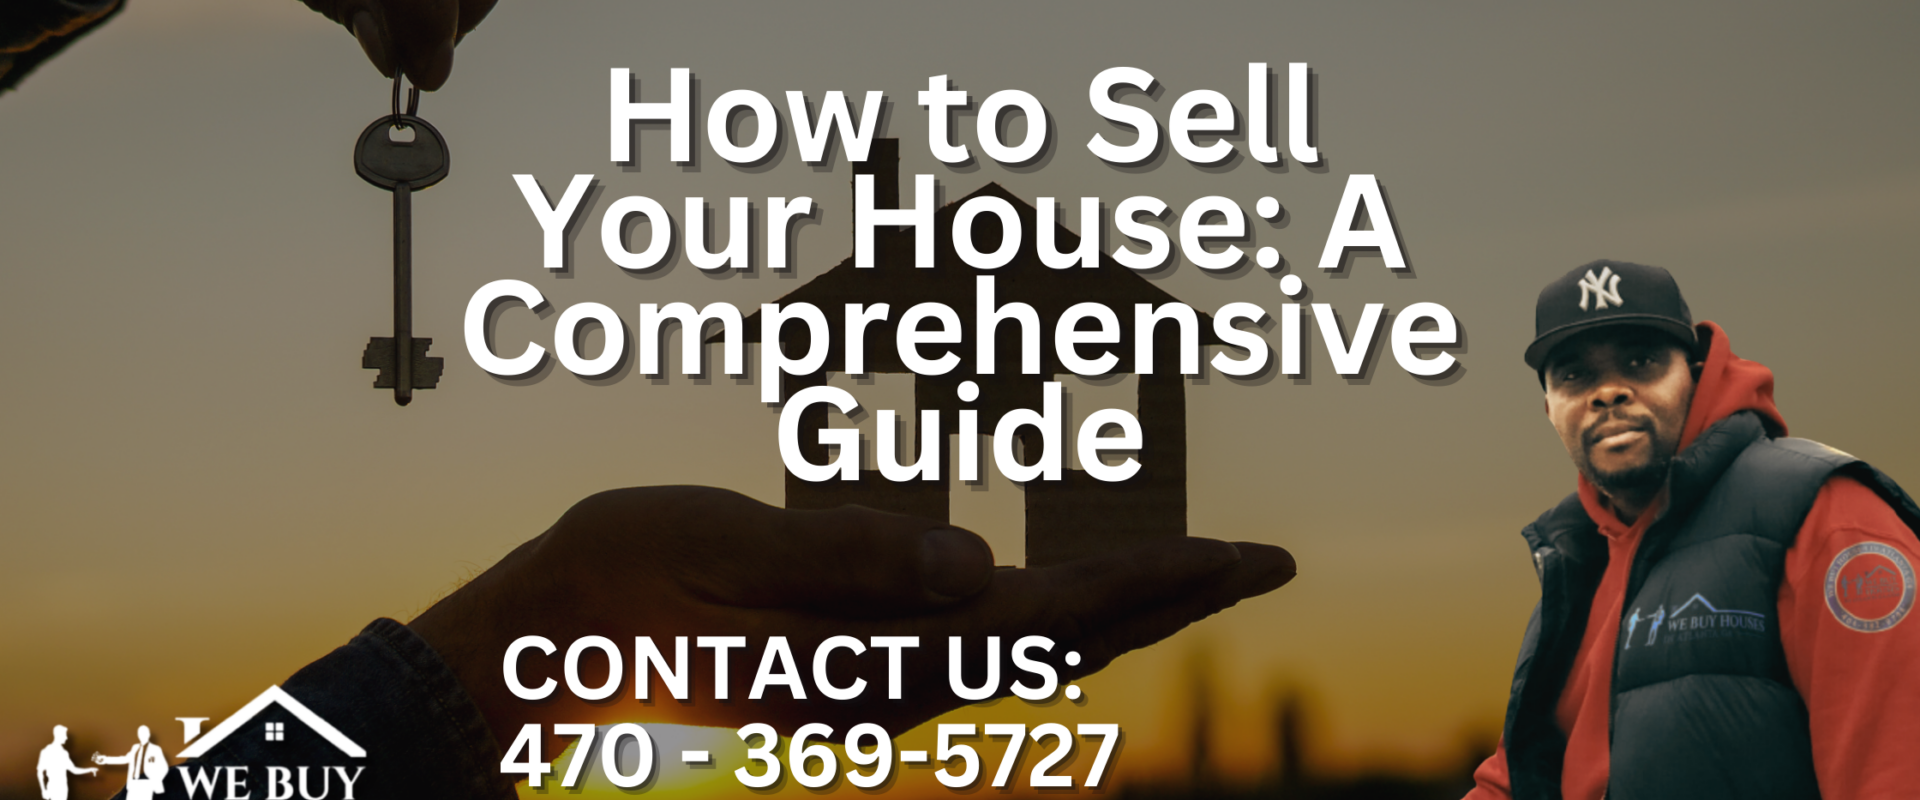 How-to-Sell-Your-House-A-Comprehensive-Guide